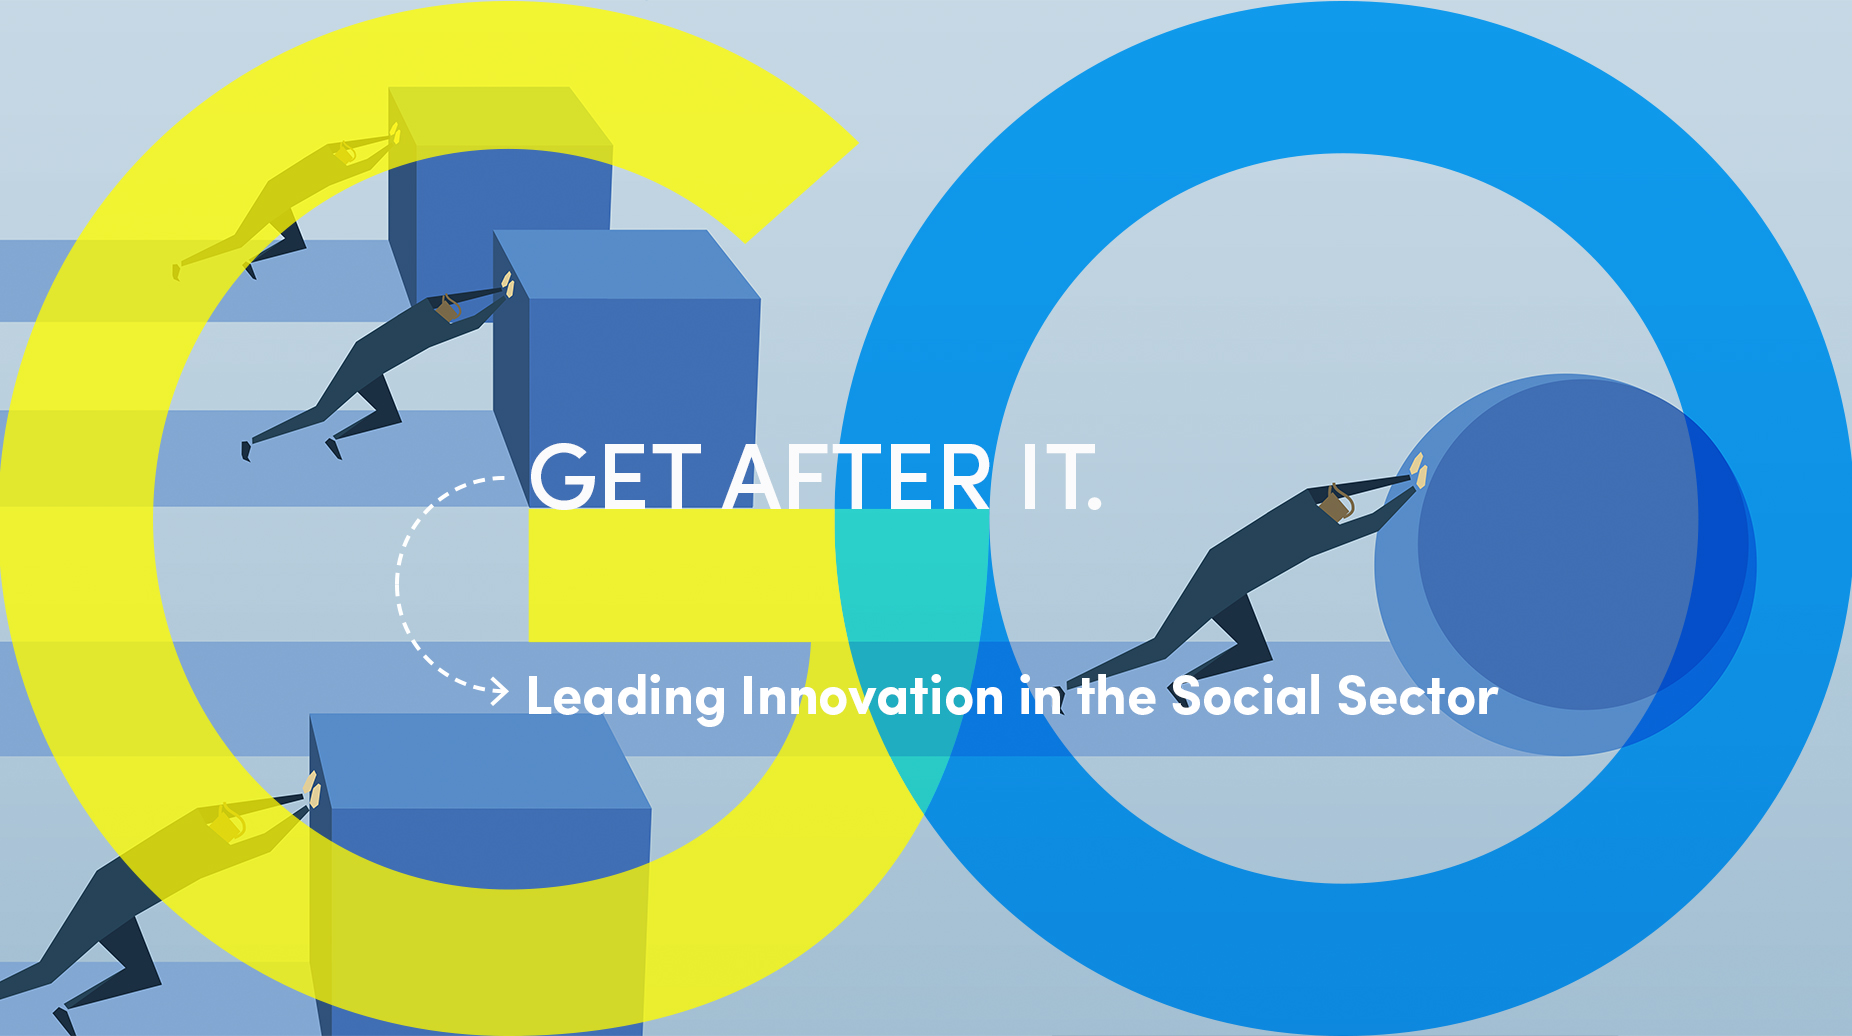 Get after it. Leading innovation in the social sector.